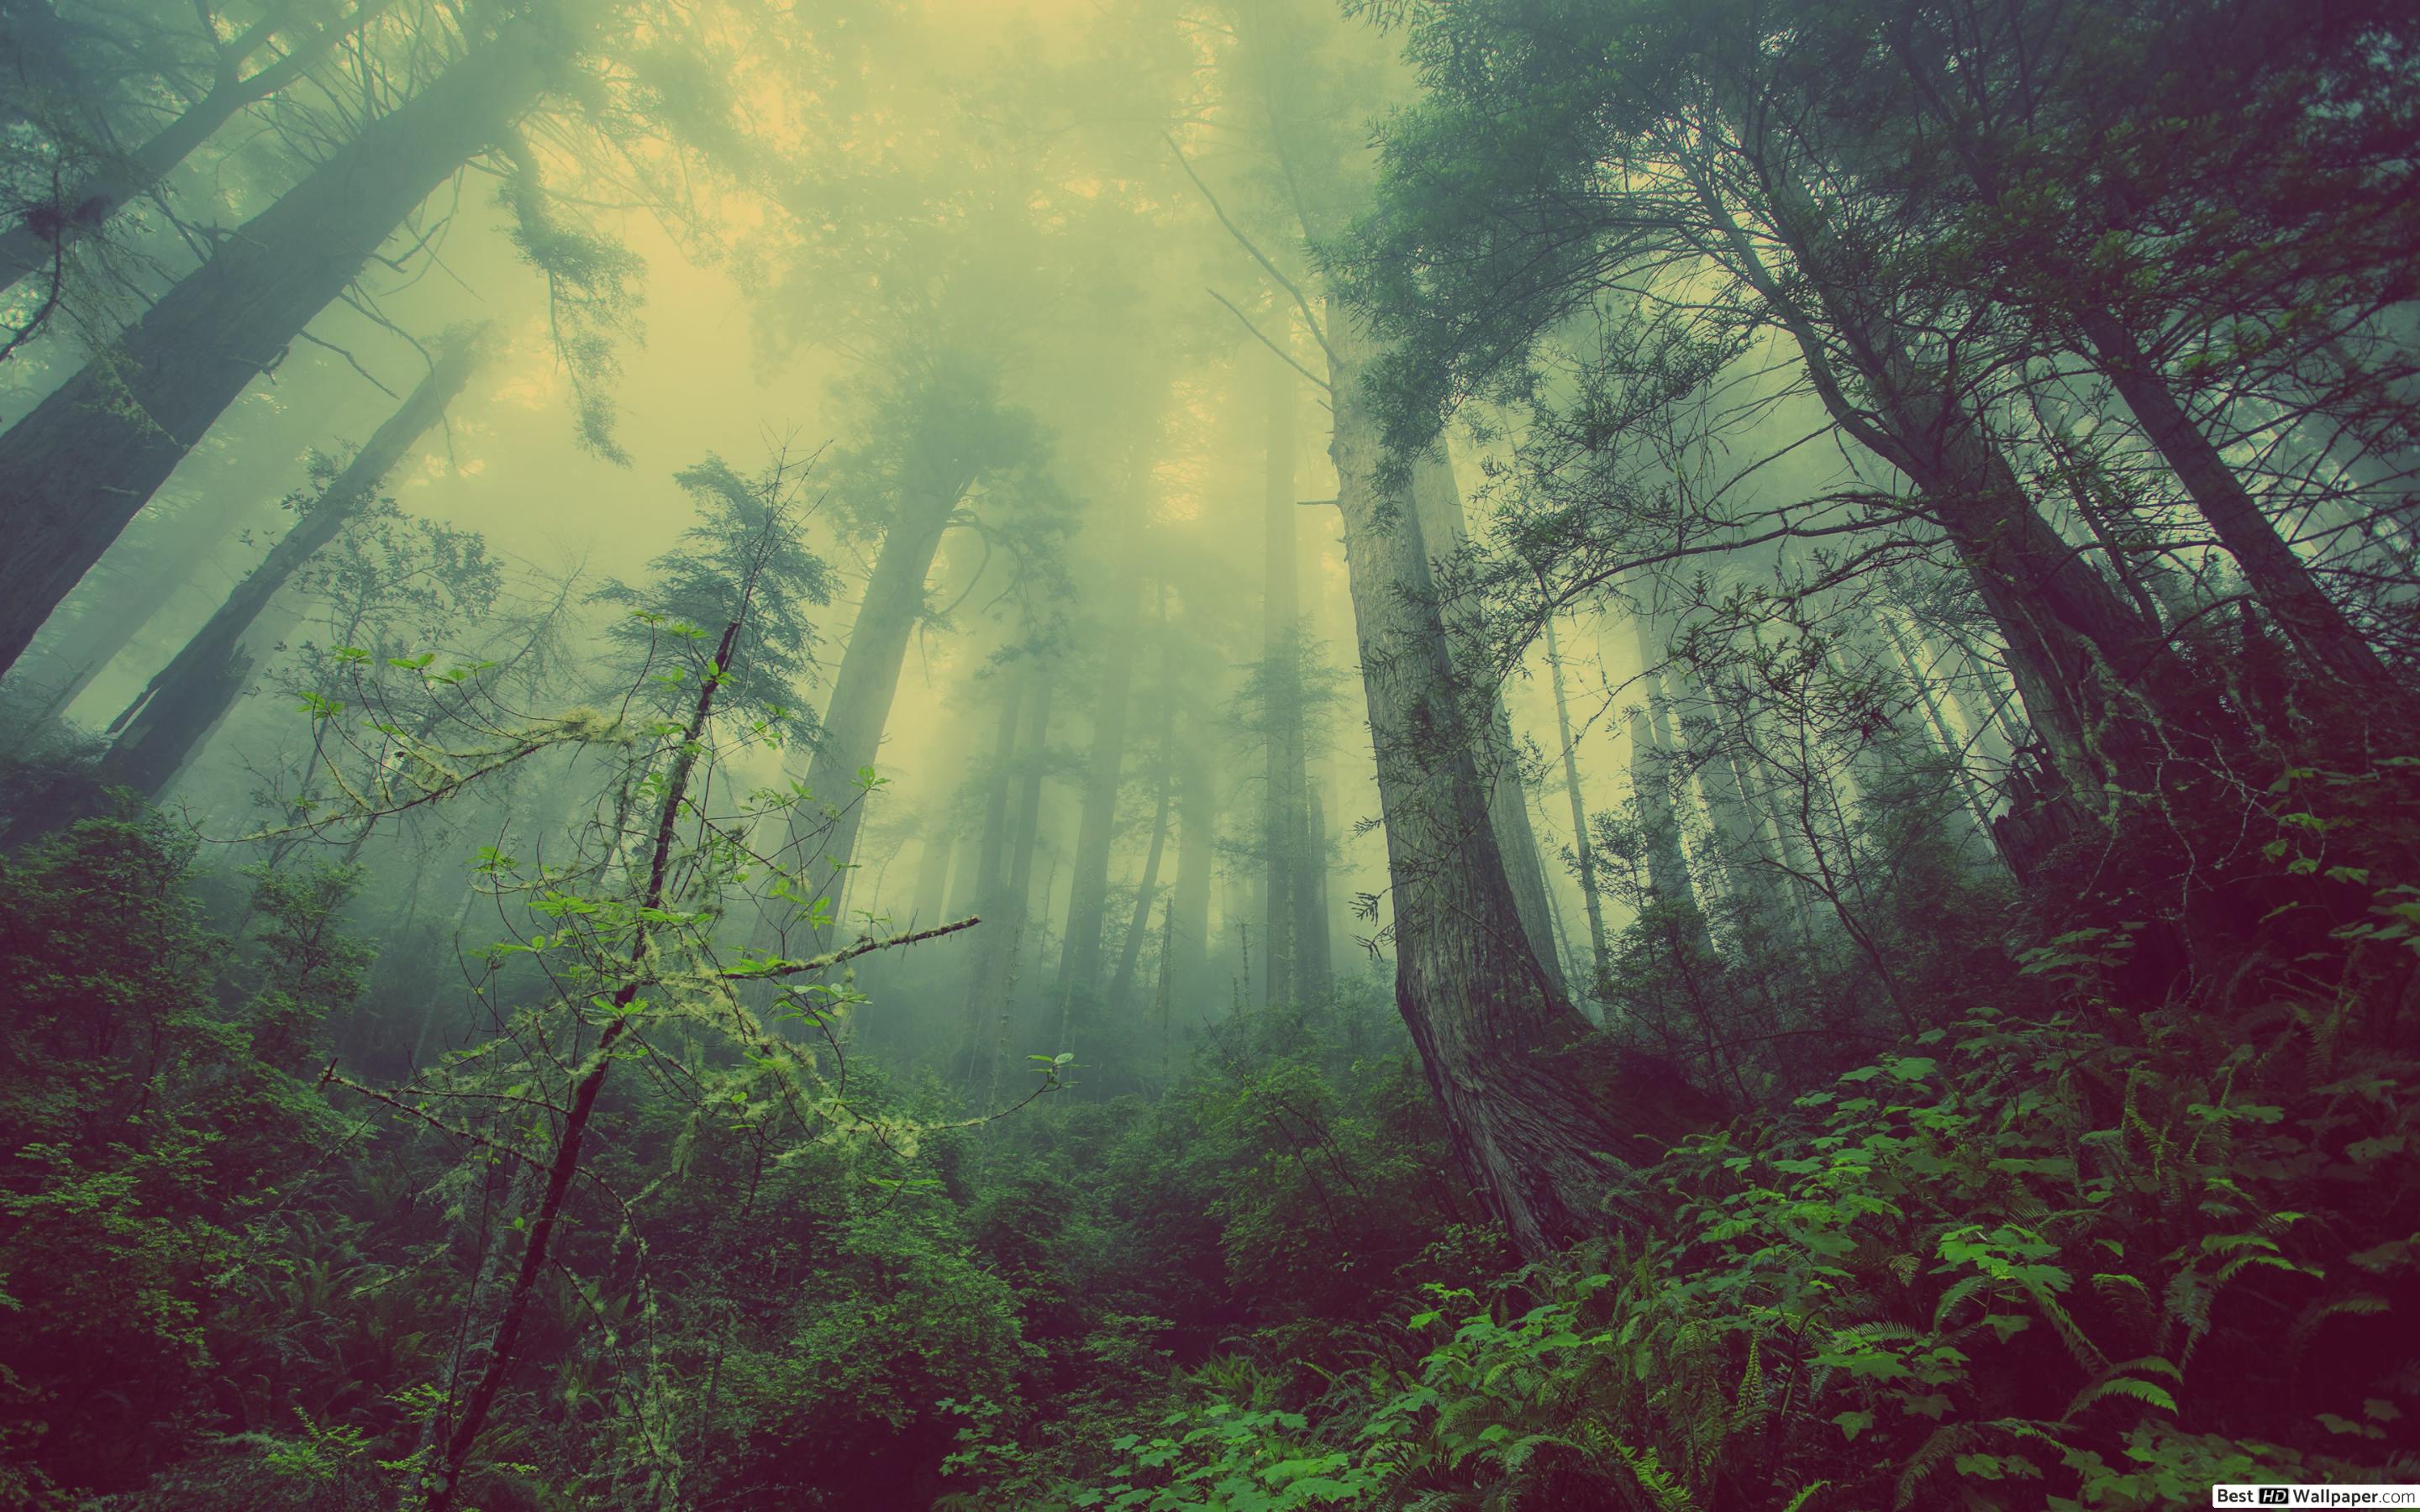 Rainy Forests HD wallpaper download